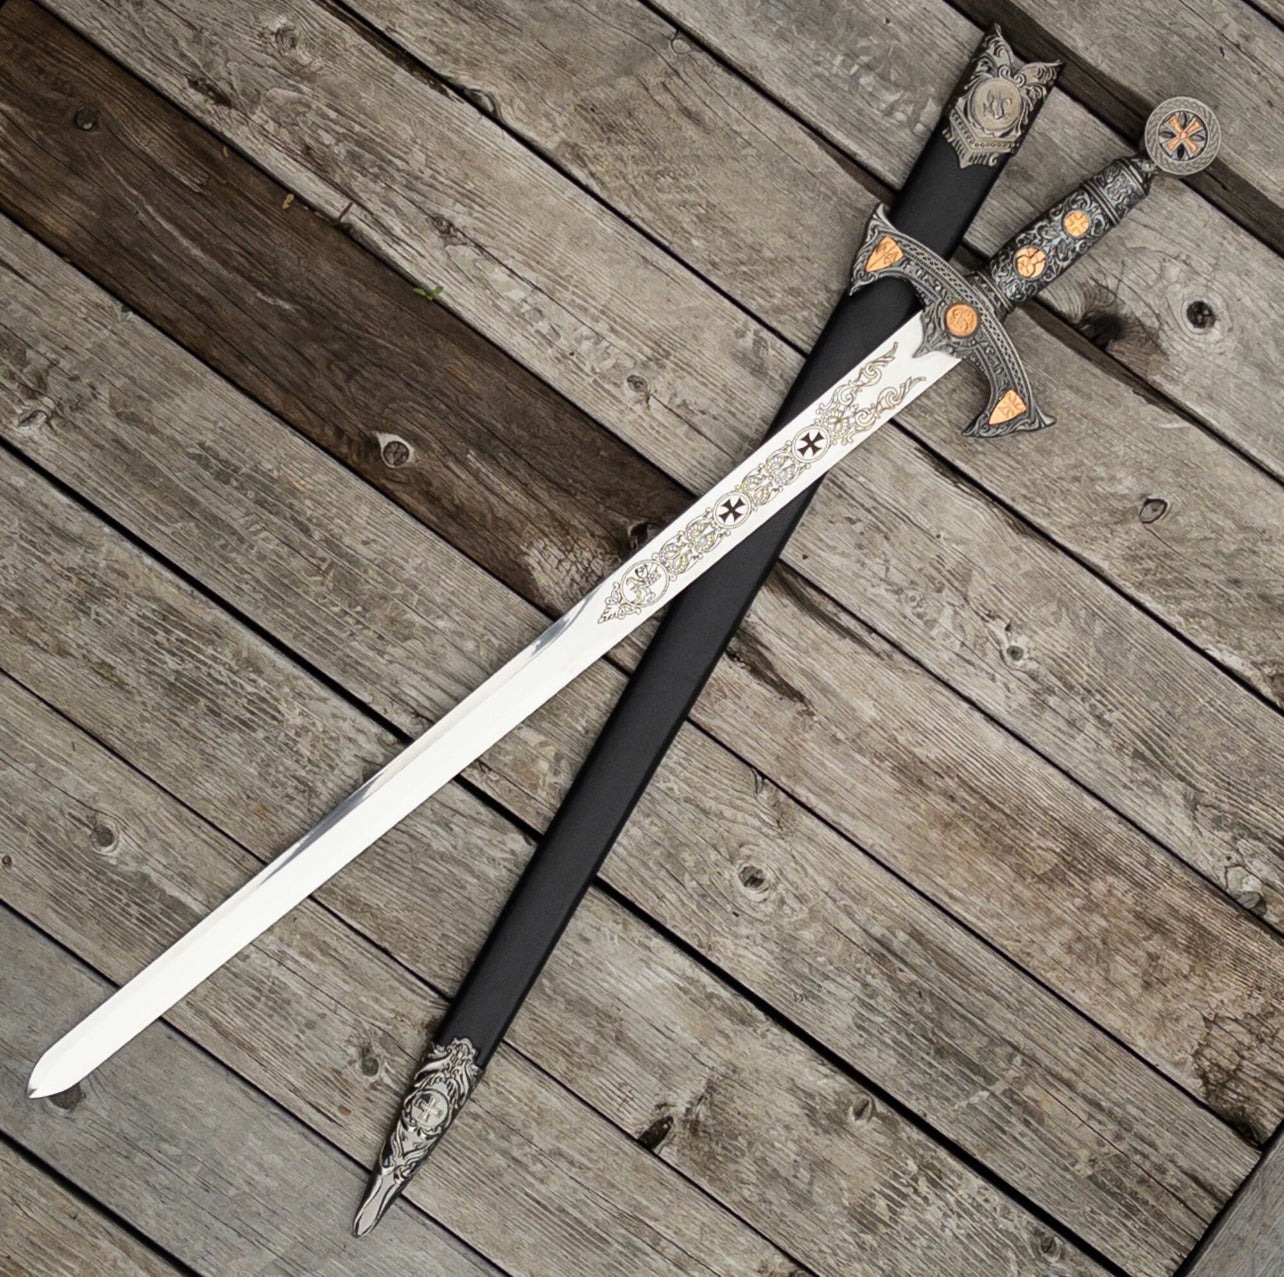 Knights Templar Crusader Decorative Sword - Medieval Inspired Stainless Steel Collectible Replica Display Sword with Scabbard